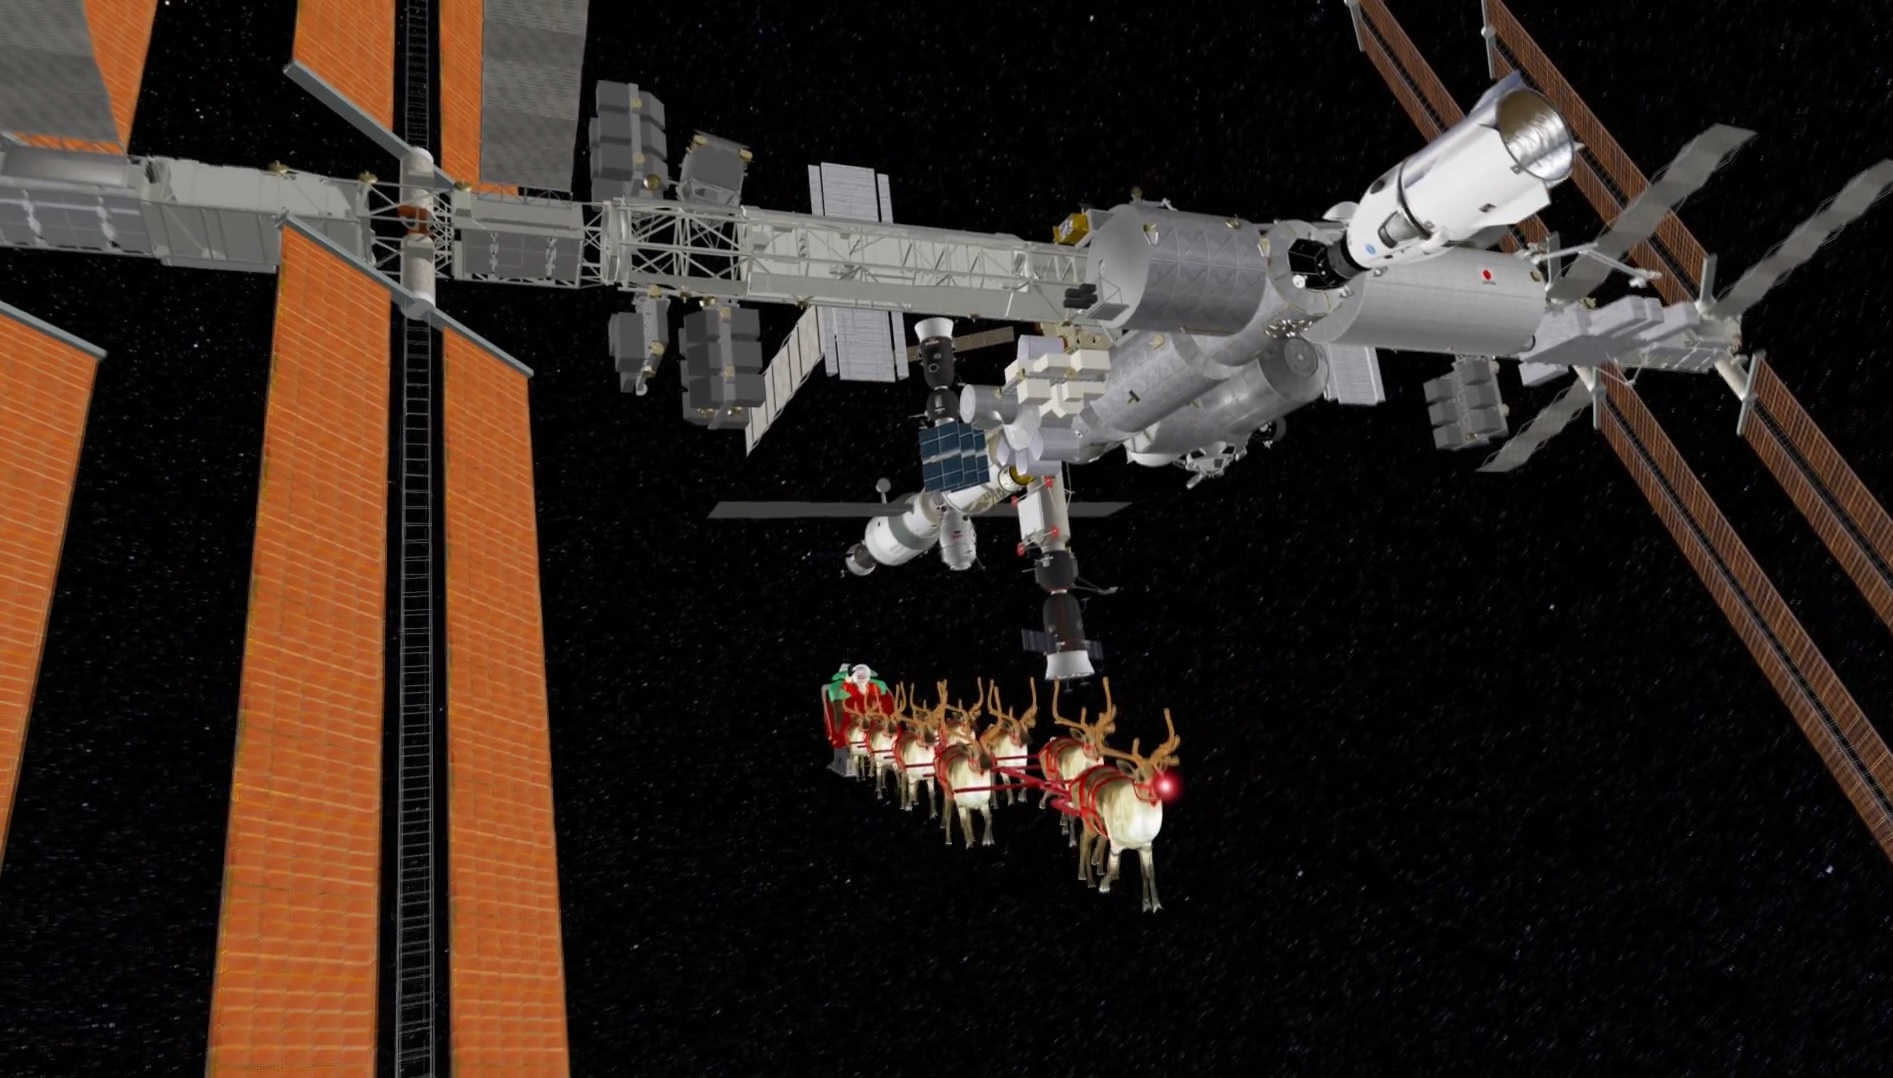 NORAD tracks Santa Claus in cosmic time out to the World Dwelling Problem